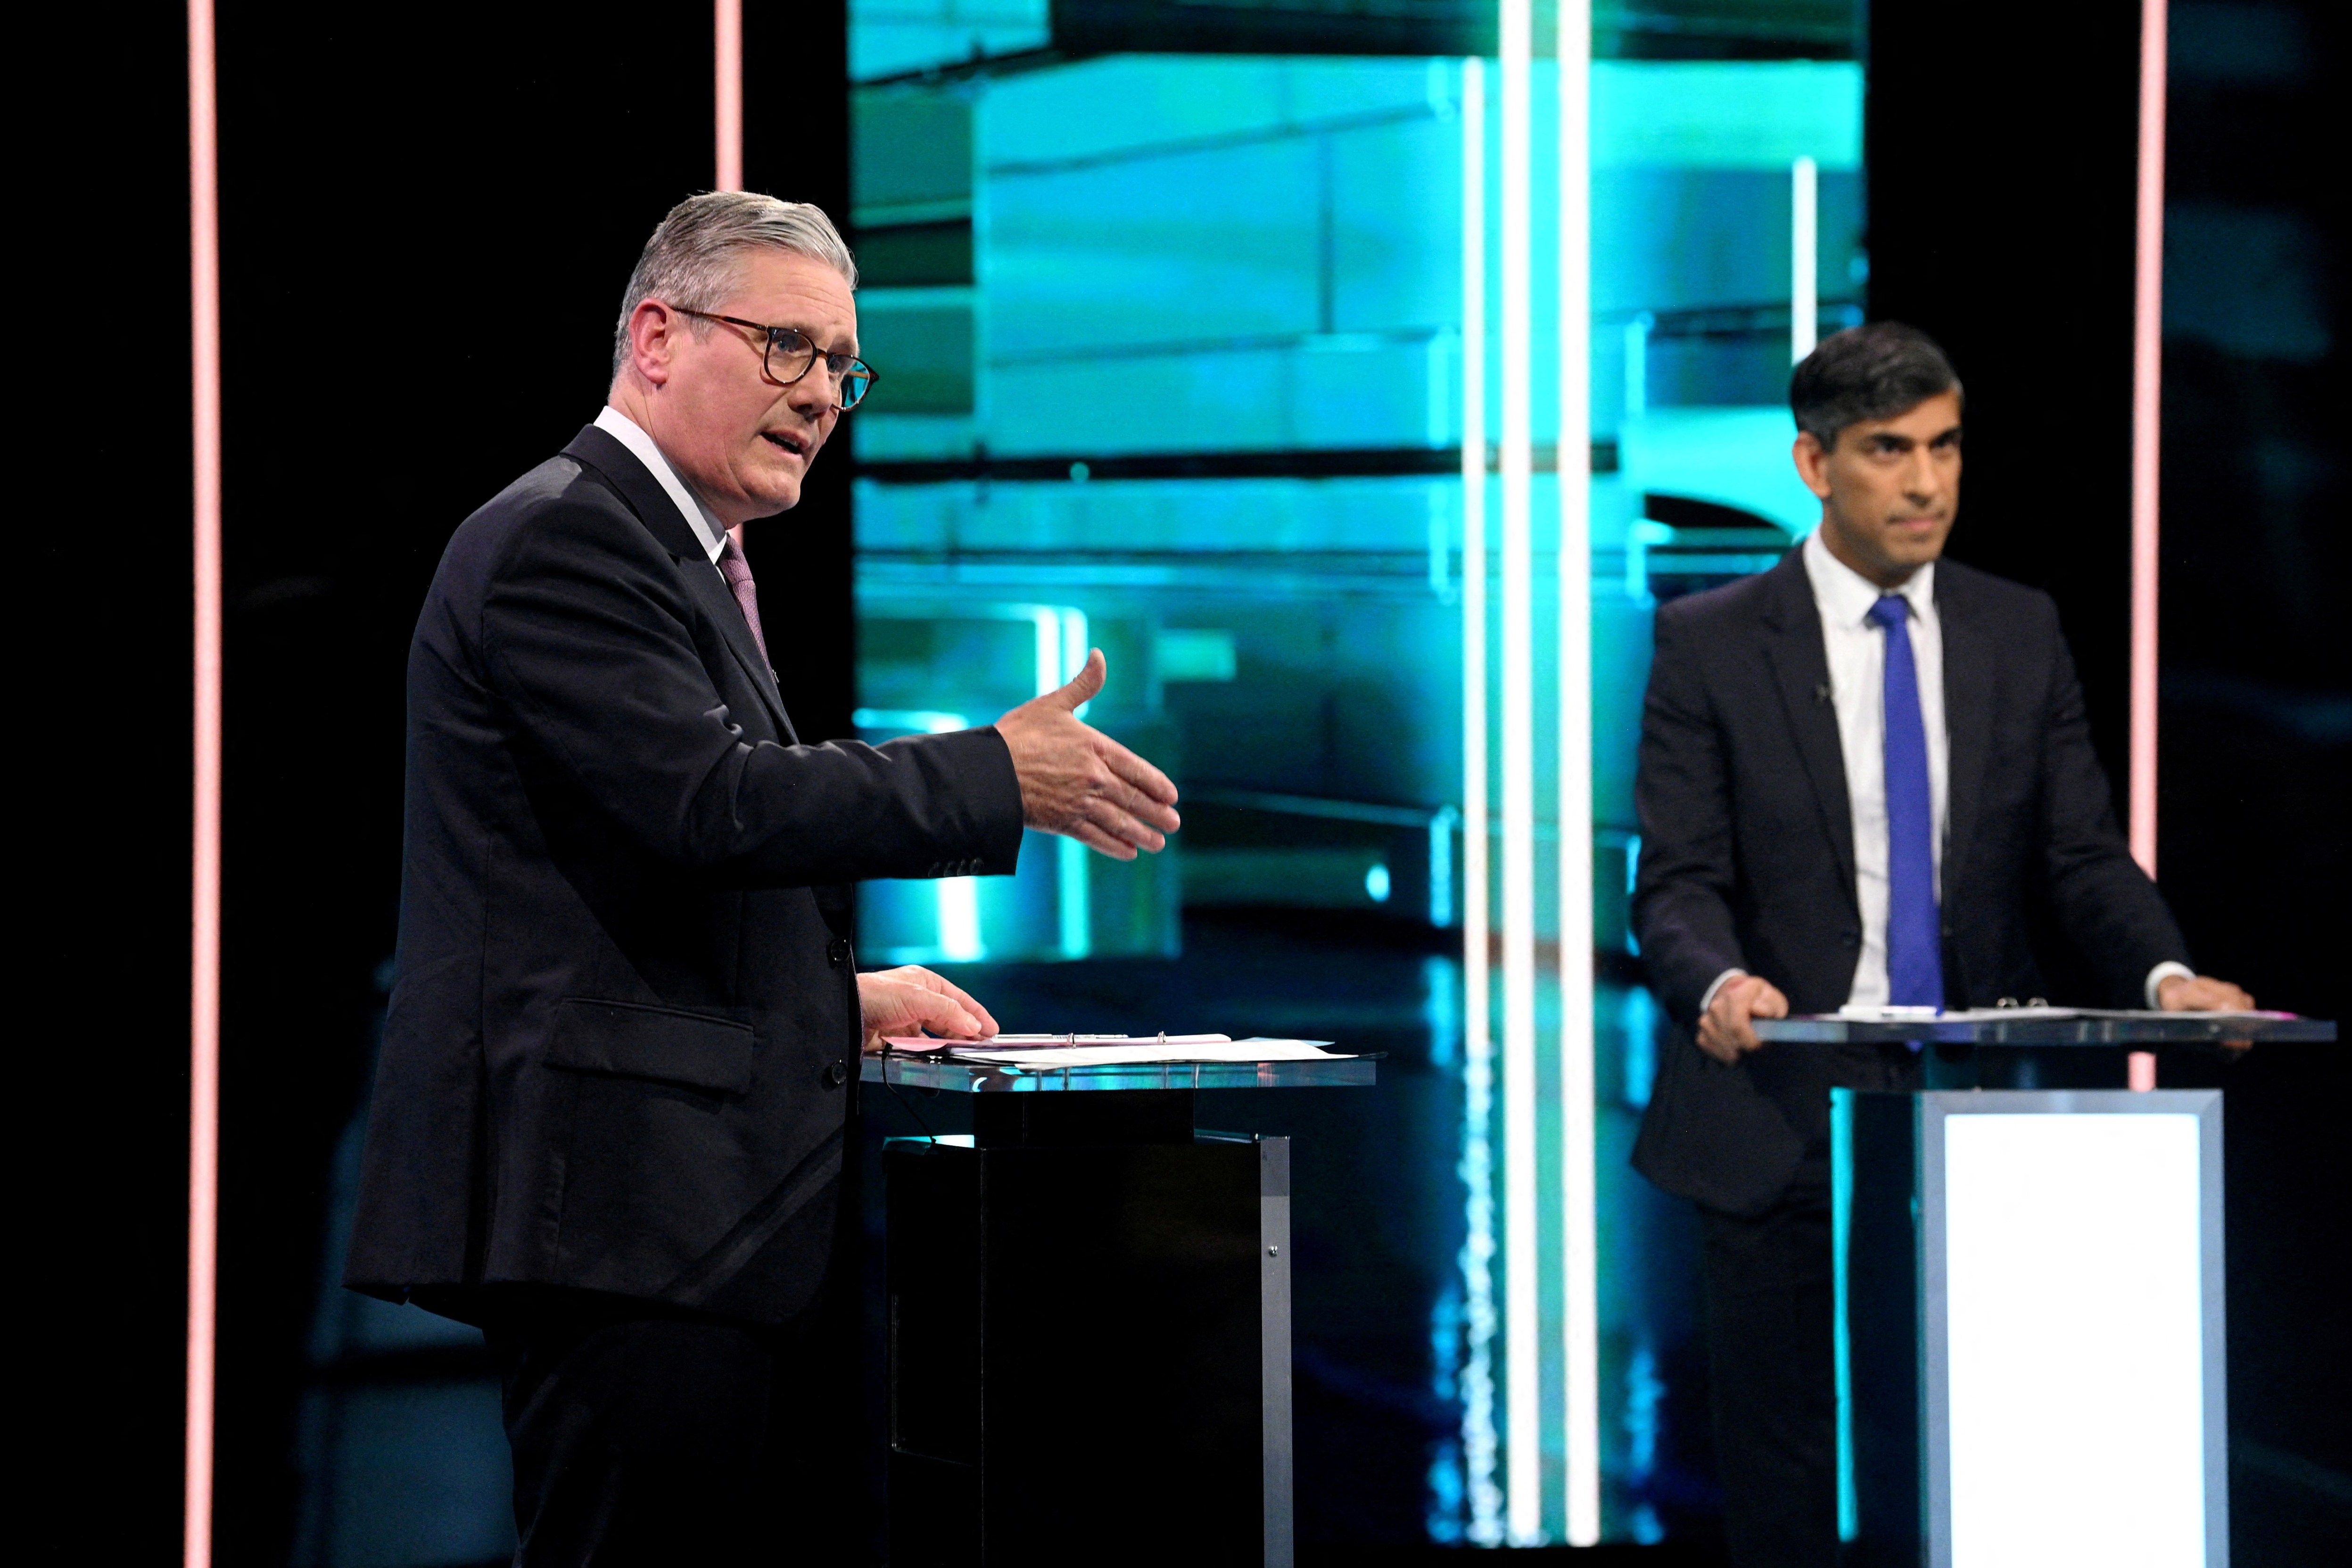 Rishi Sunak used the first head-to-head televised debate to claim that Sir Keir Starmer would hit every household with a £2,000 tax bill